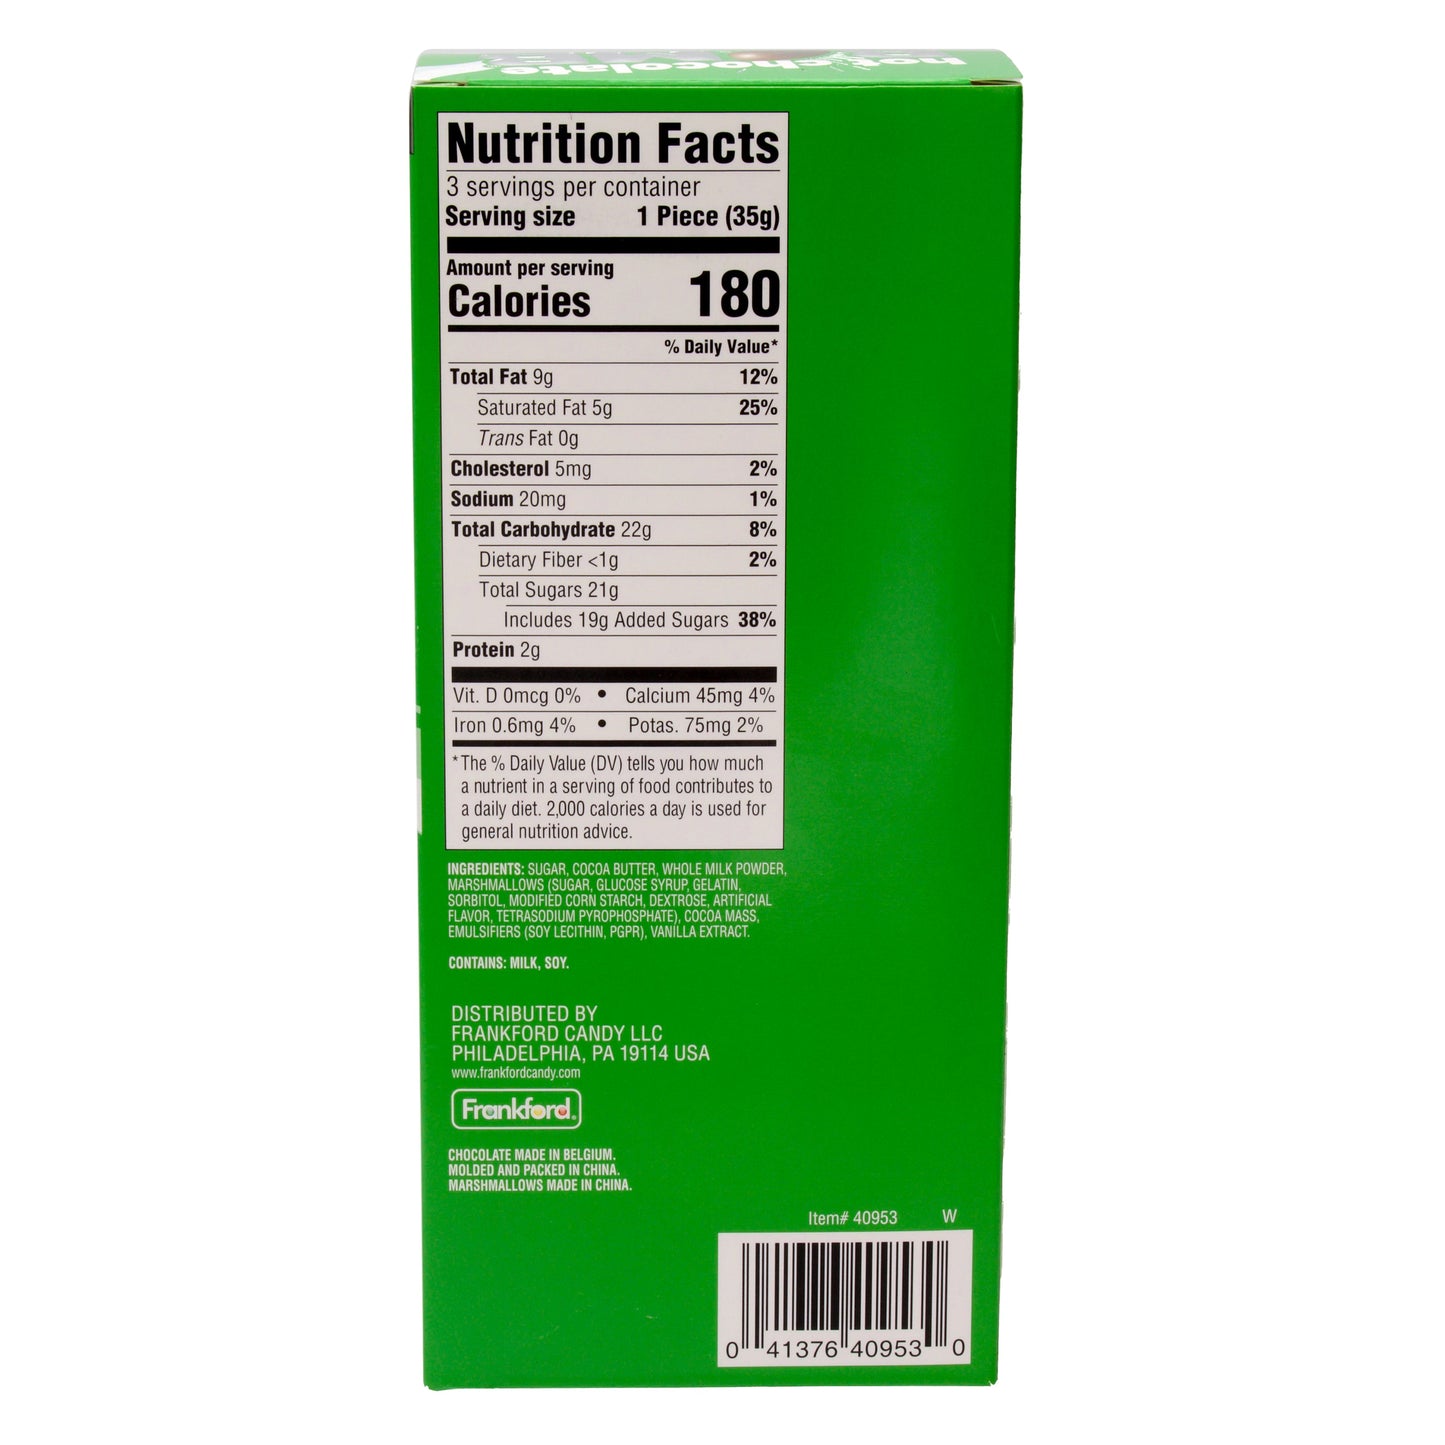 back of green box with nutrition facts and ingredients